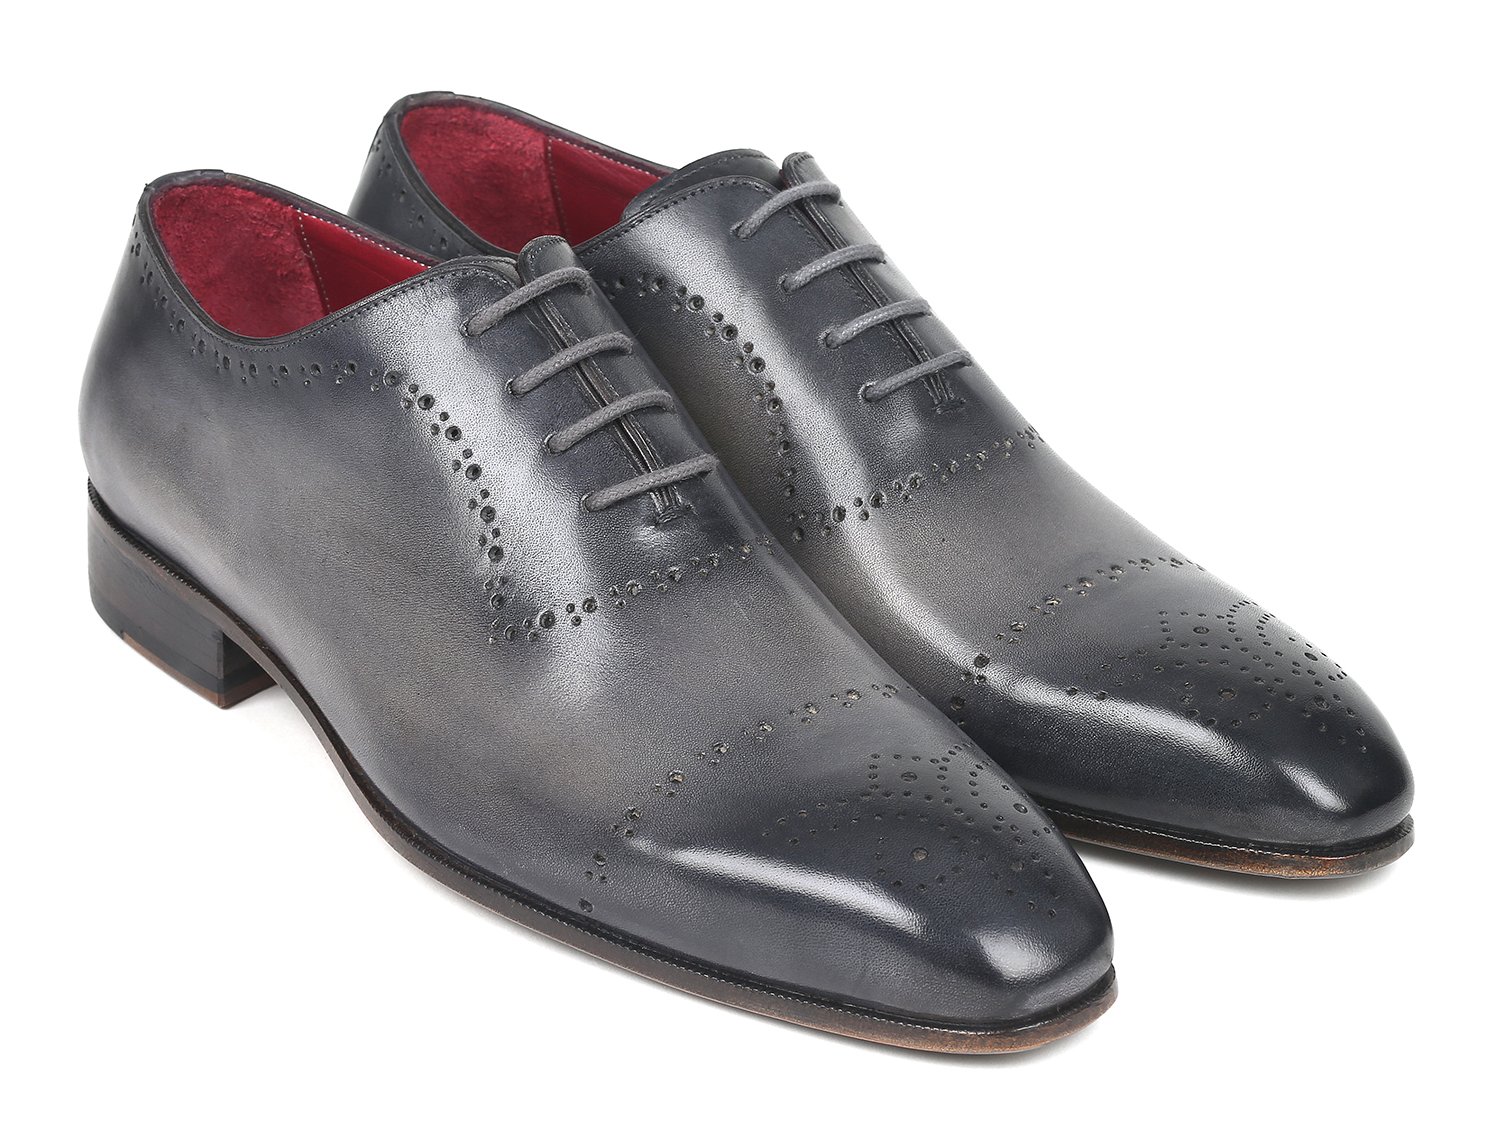 Paul Parkman "ZLS34GRY" Grey Genuine Calfskin Leather Perforated Oxford Shoes .